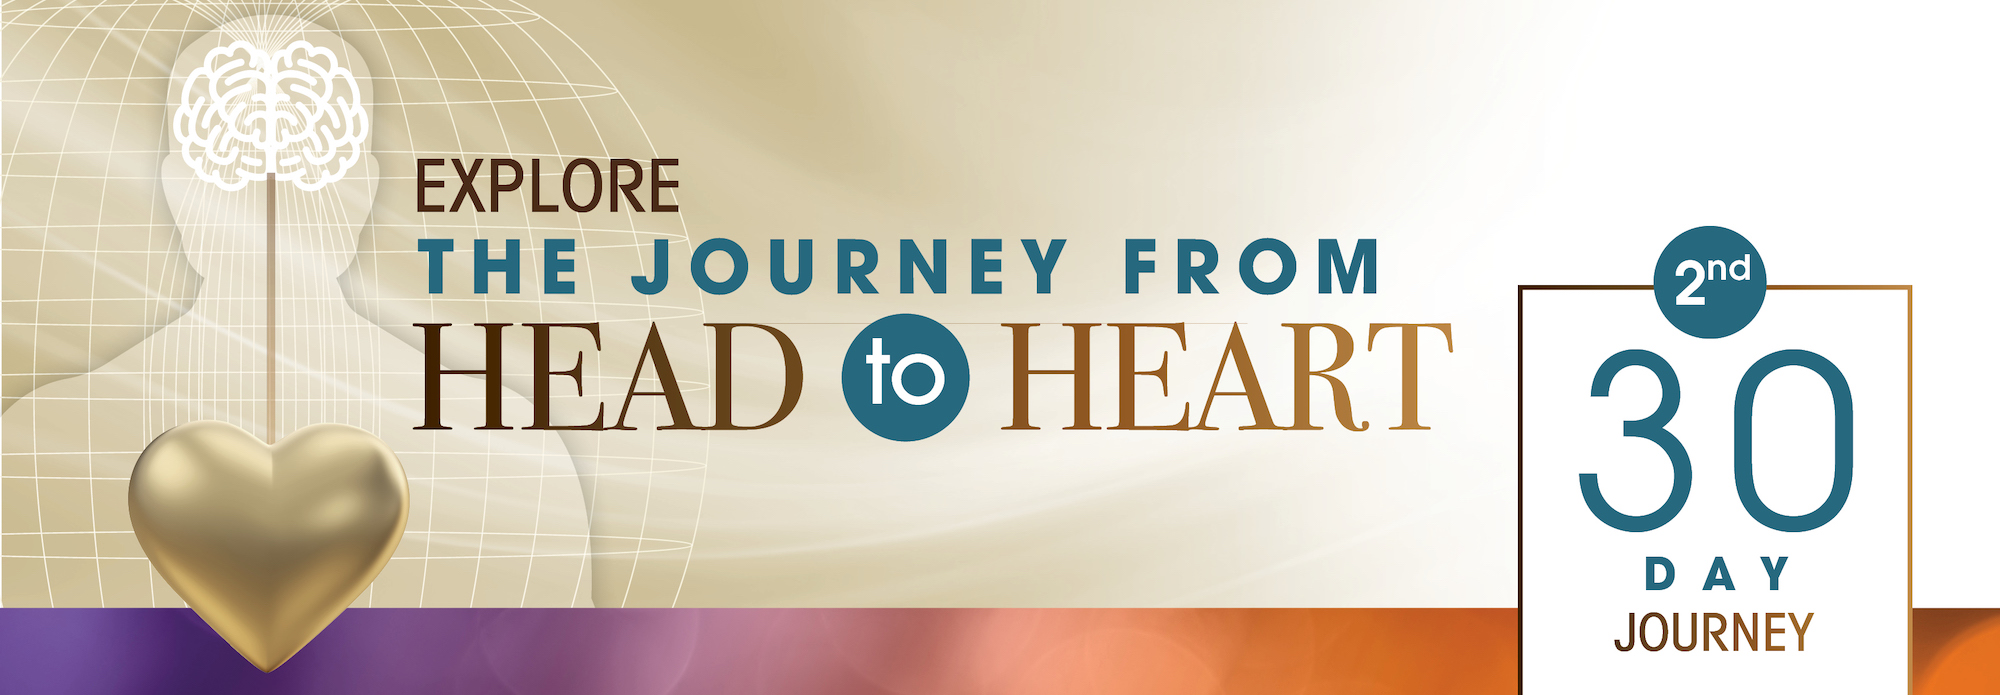 Explore Journey from Head to Heart